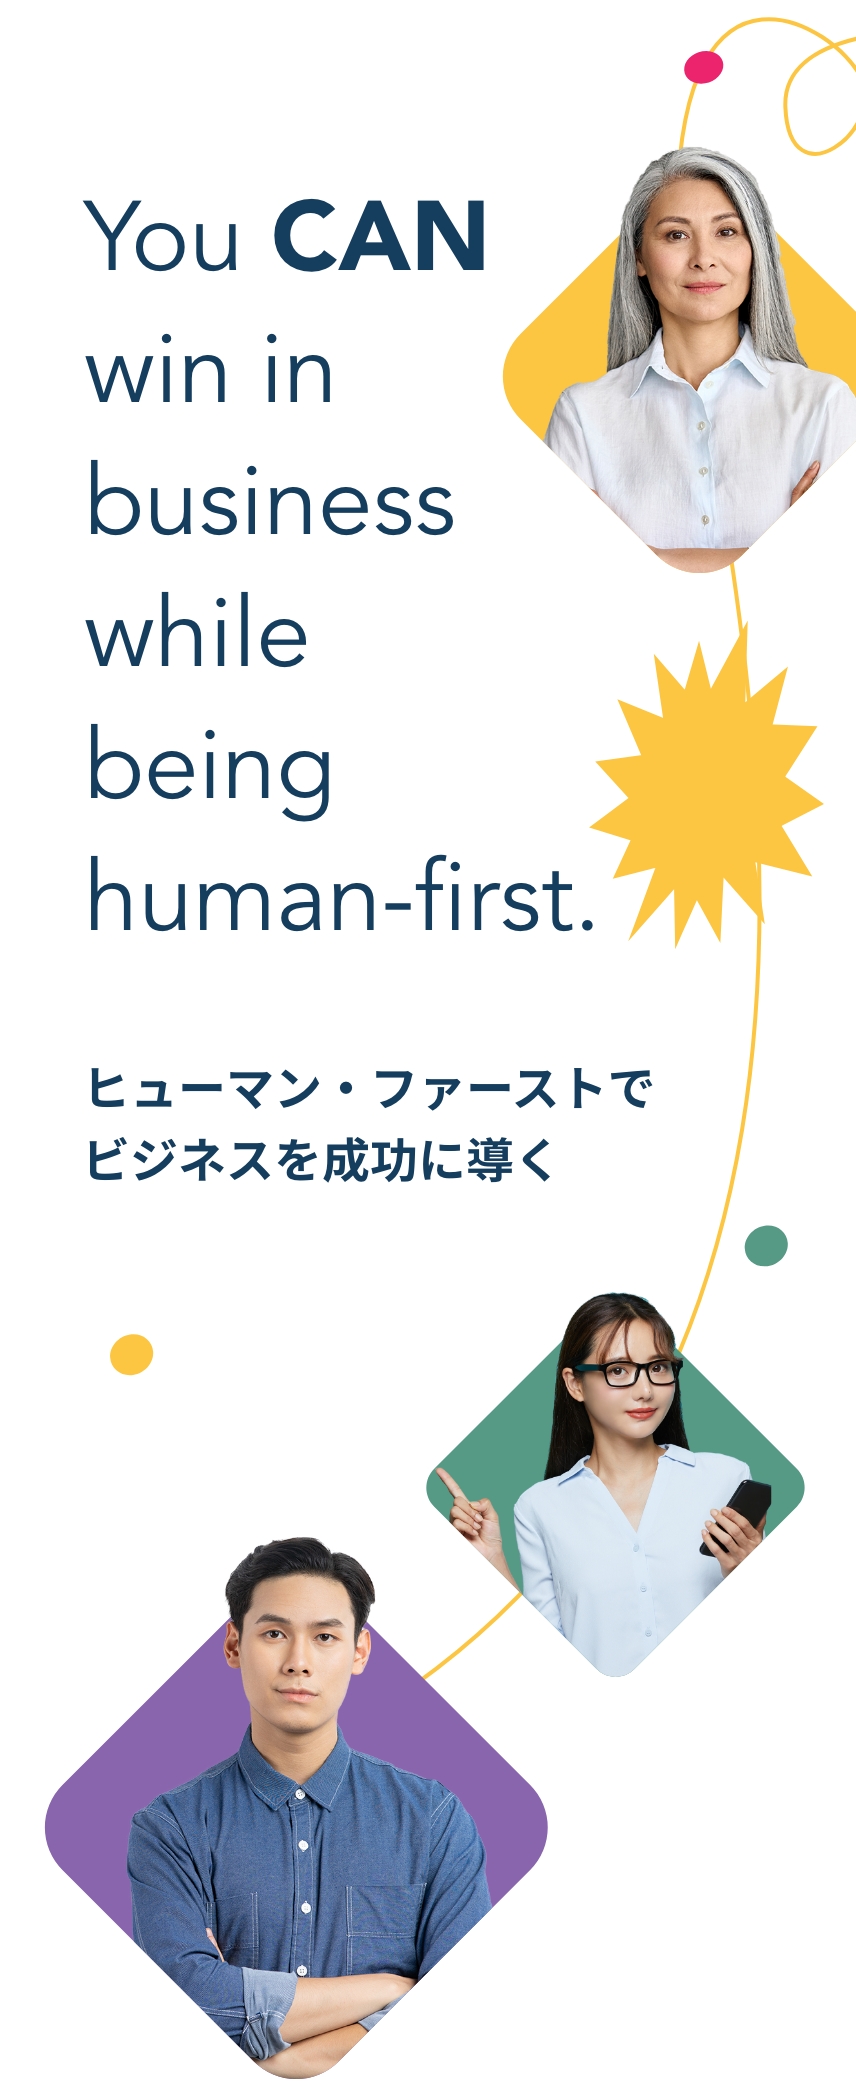 you CAN win in business while being human-first. ヒューマン・ファーストでビジネスを成功に導く